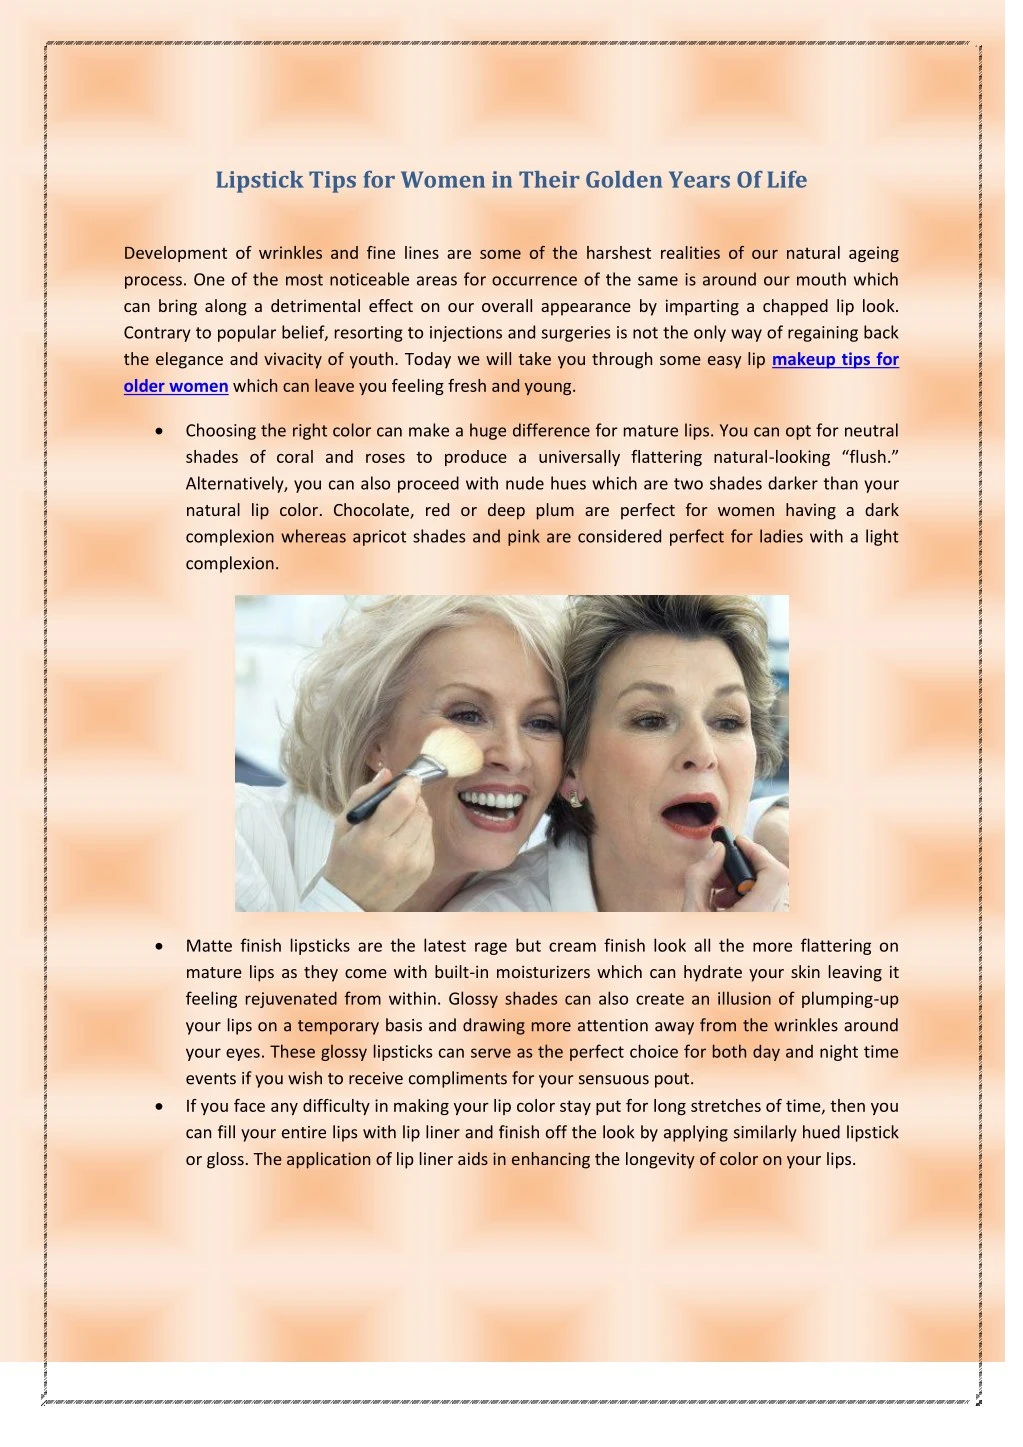 lipstick tips for women in their golden years